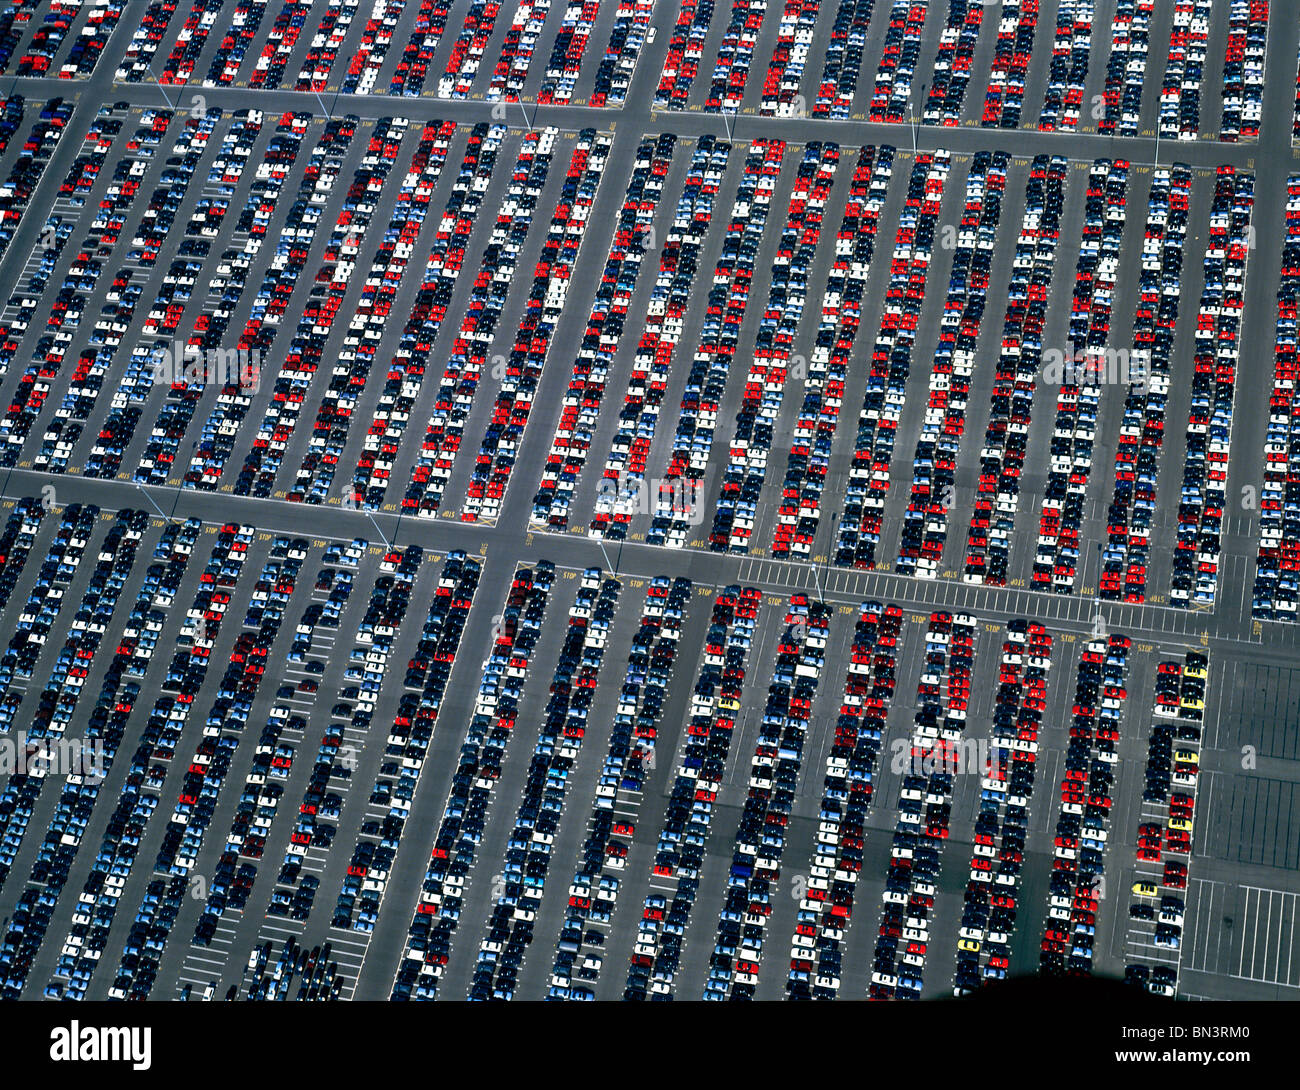 Aerial view of cars parked at parking lot Stock Photo